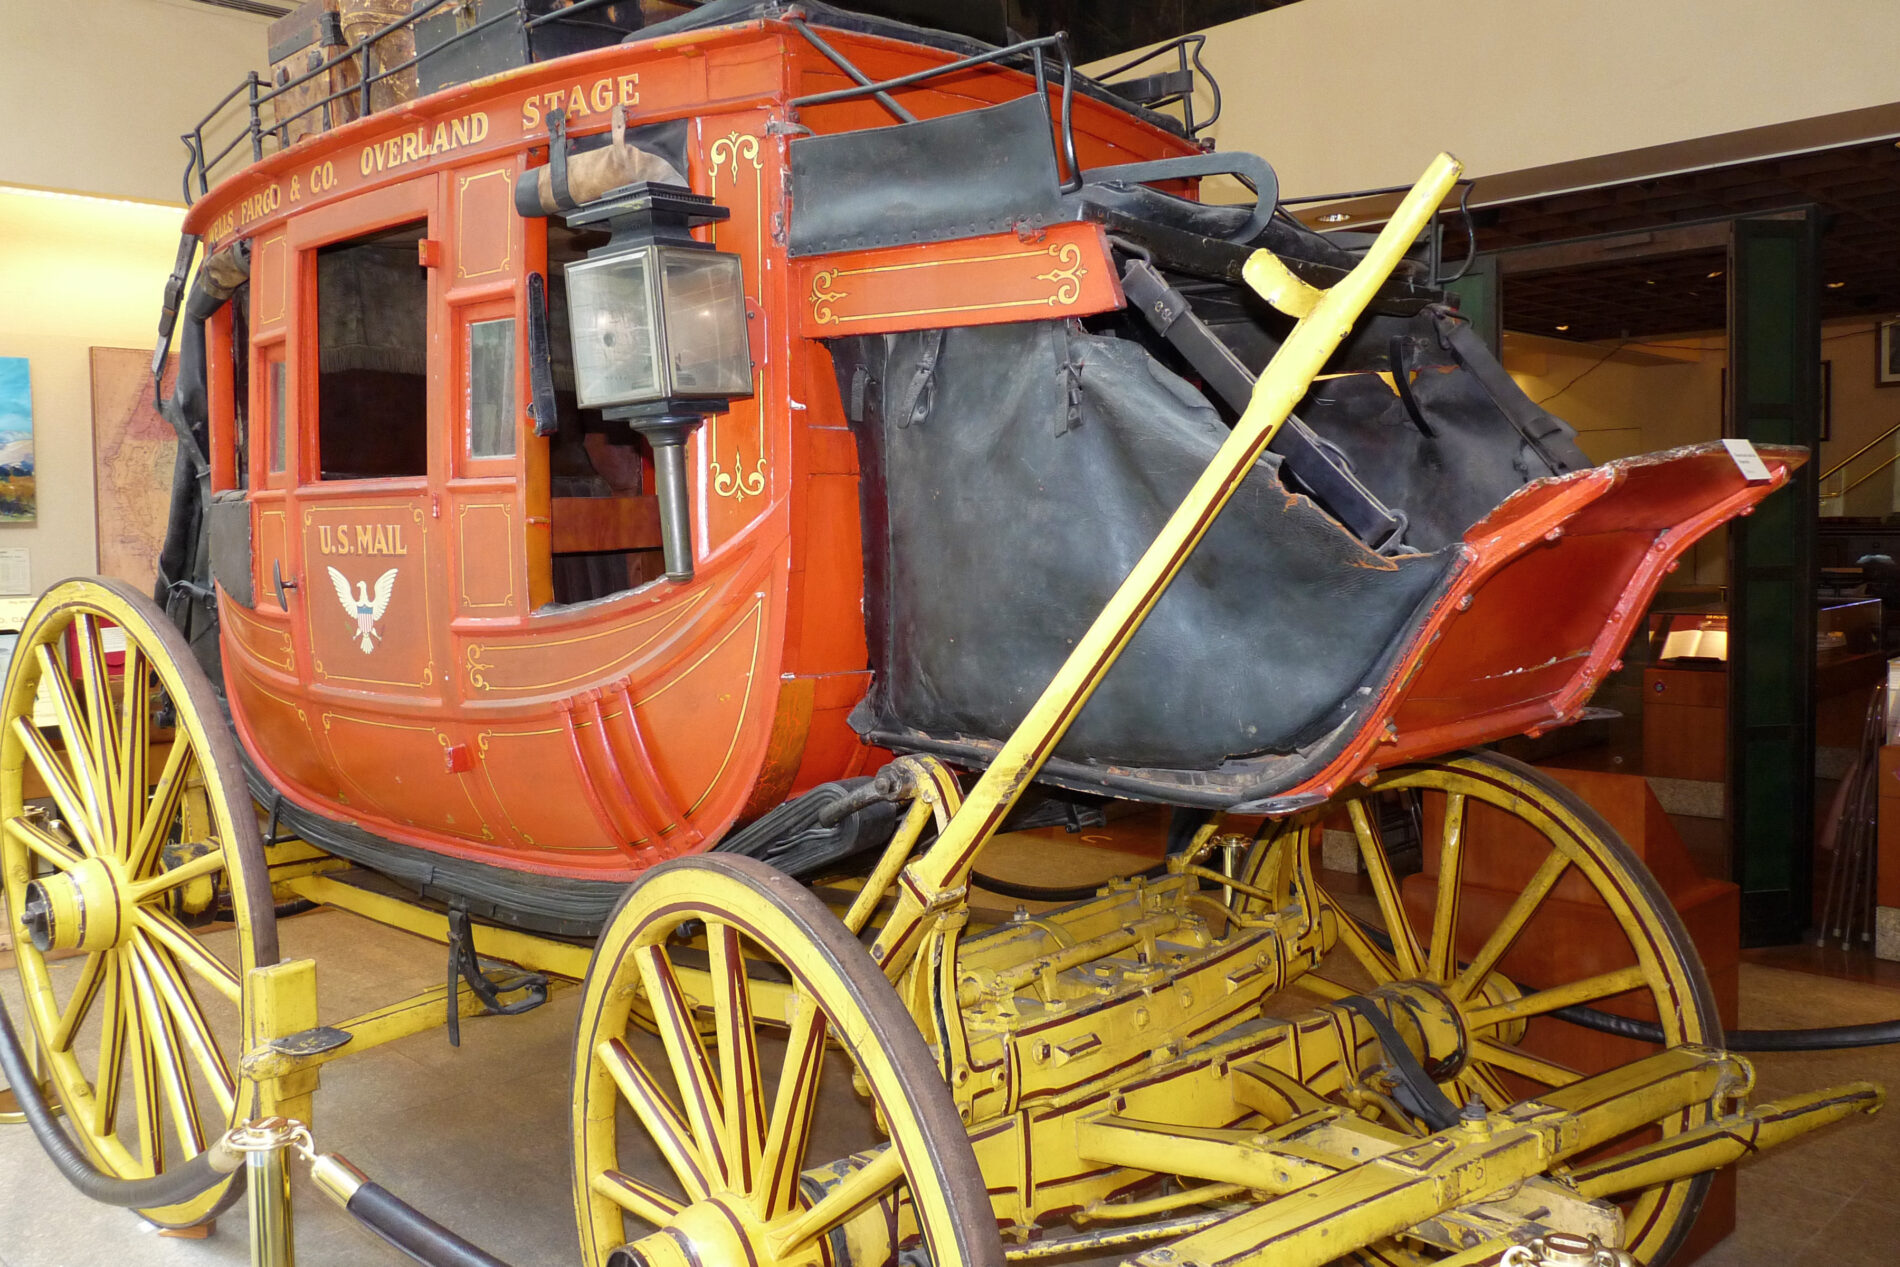 Overland stagecoach at the Wells Fargo’s History Museum, one of the free things to do in San Francisco.